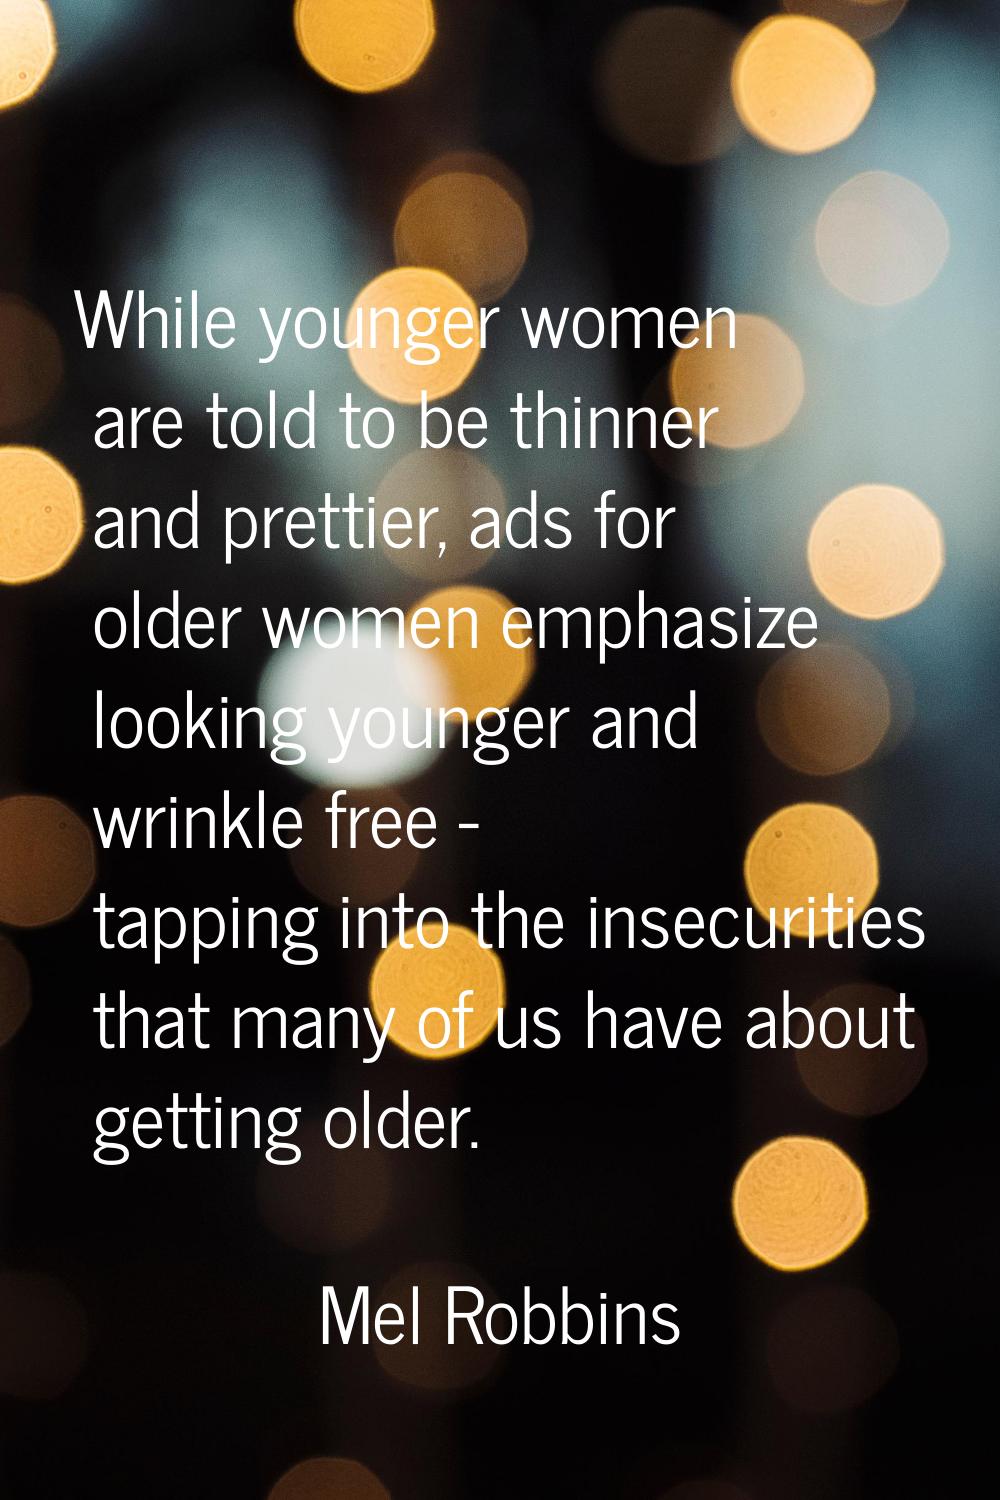 While younger women are told to be thinner and prettier, ads for older women emphasize looking youn